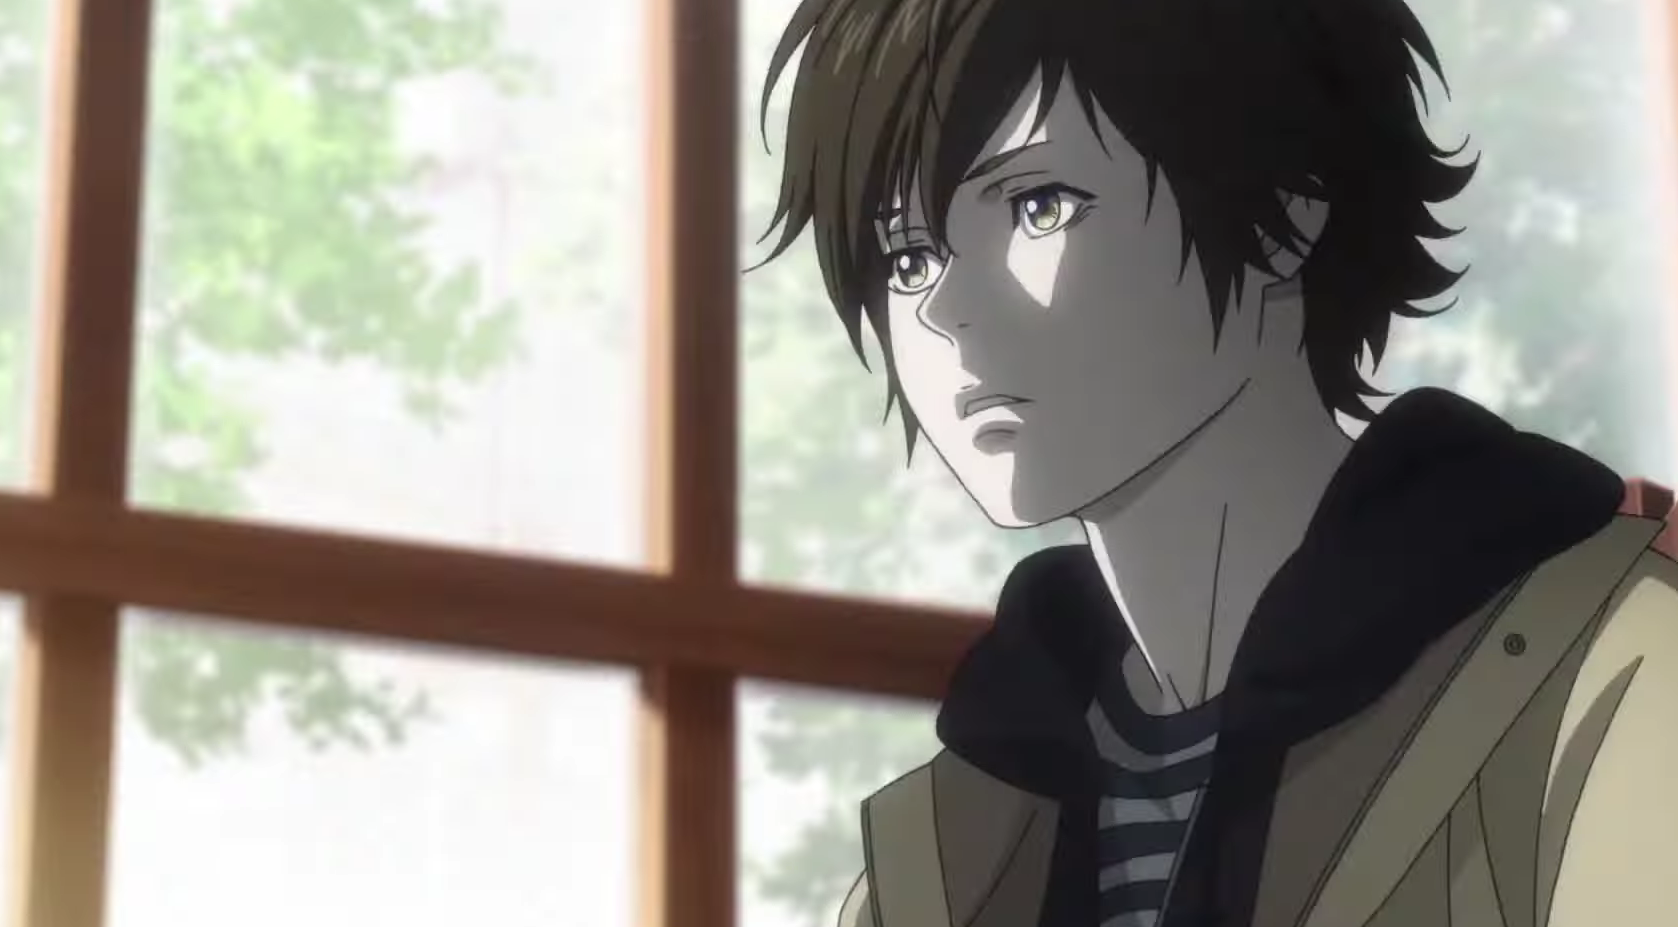 Psycho anime boy with black messy hair and brown eye